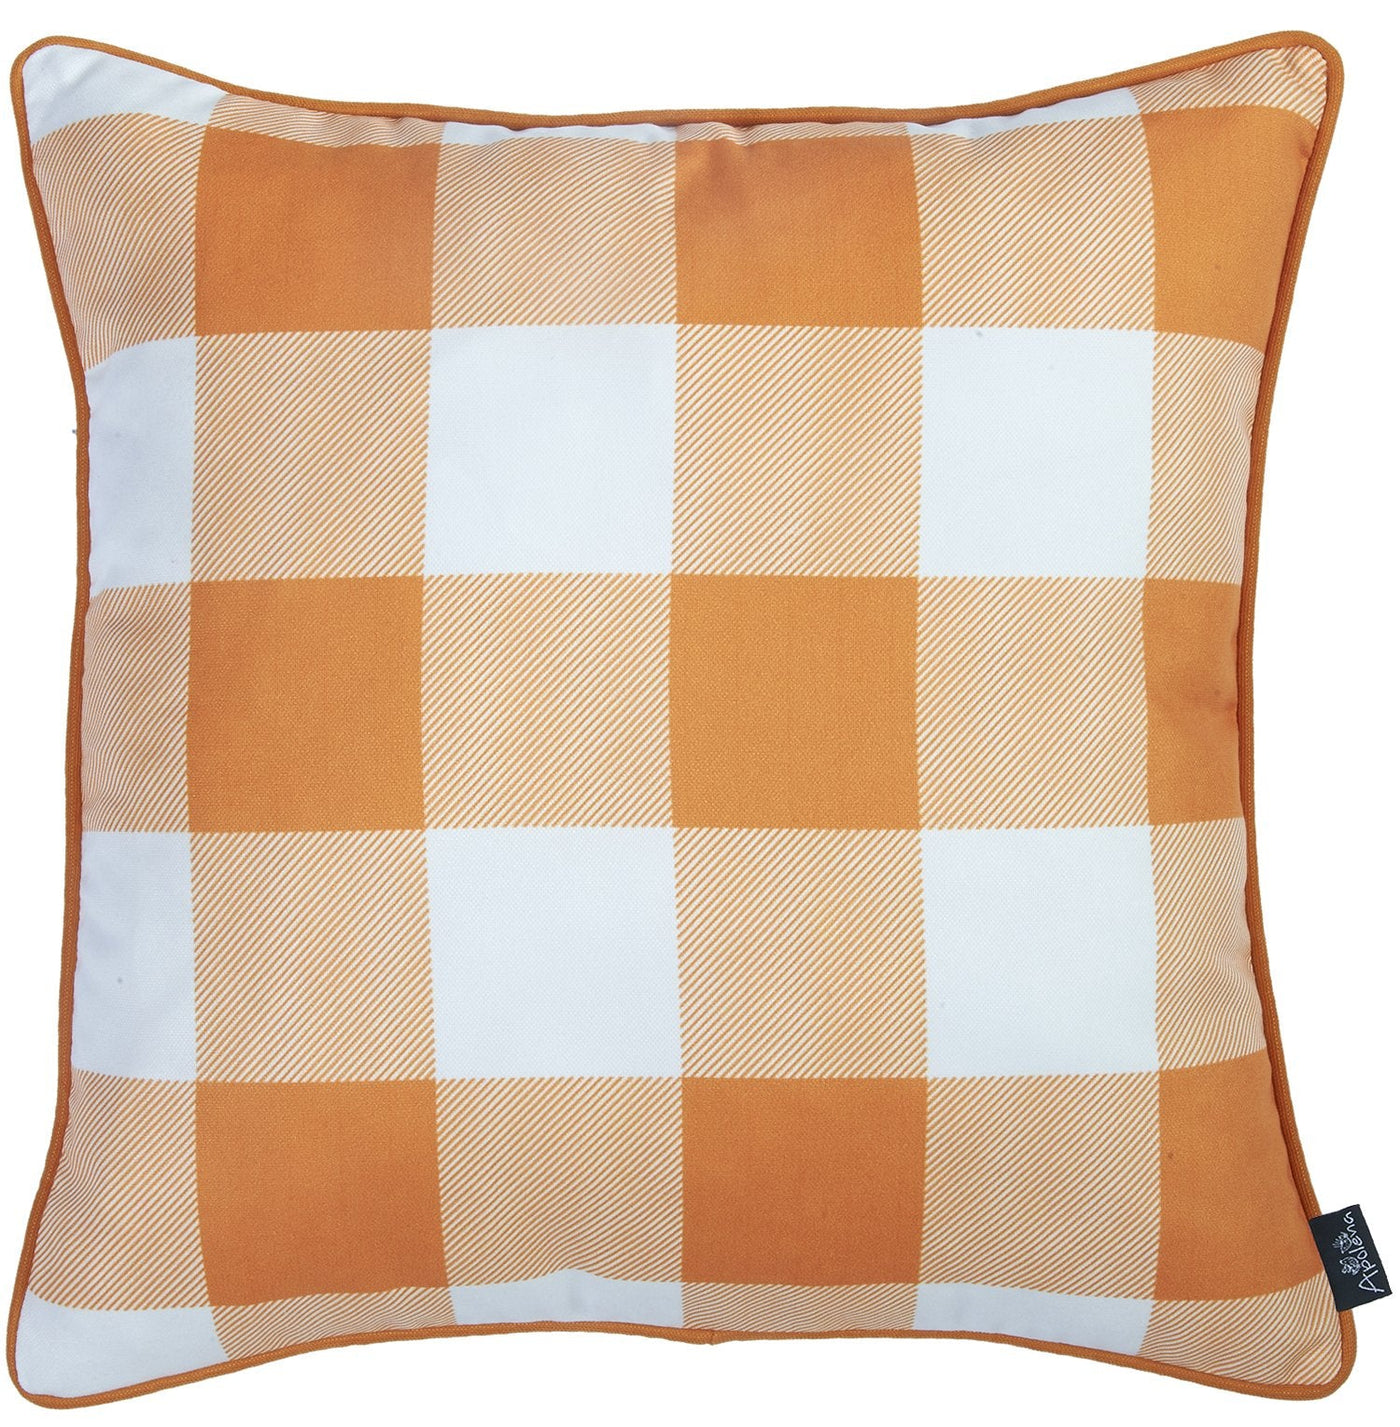 Set Of Four 18’ Orange Plaid And Pumpkin Throw Pillow Covers - Accent Throw Pillows